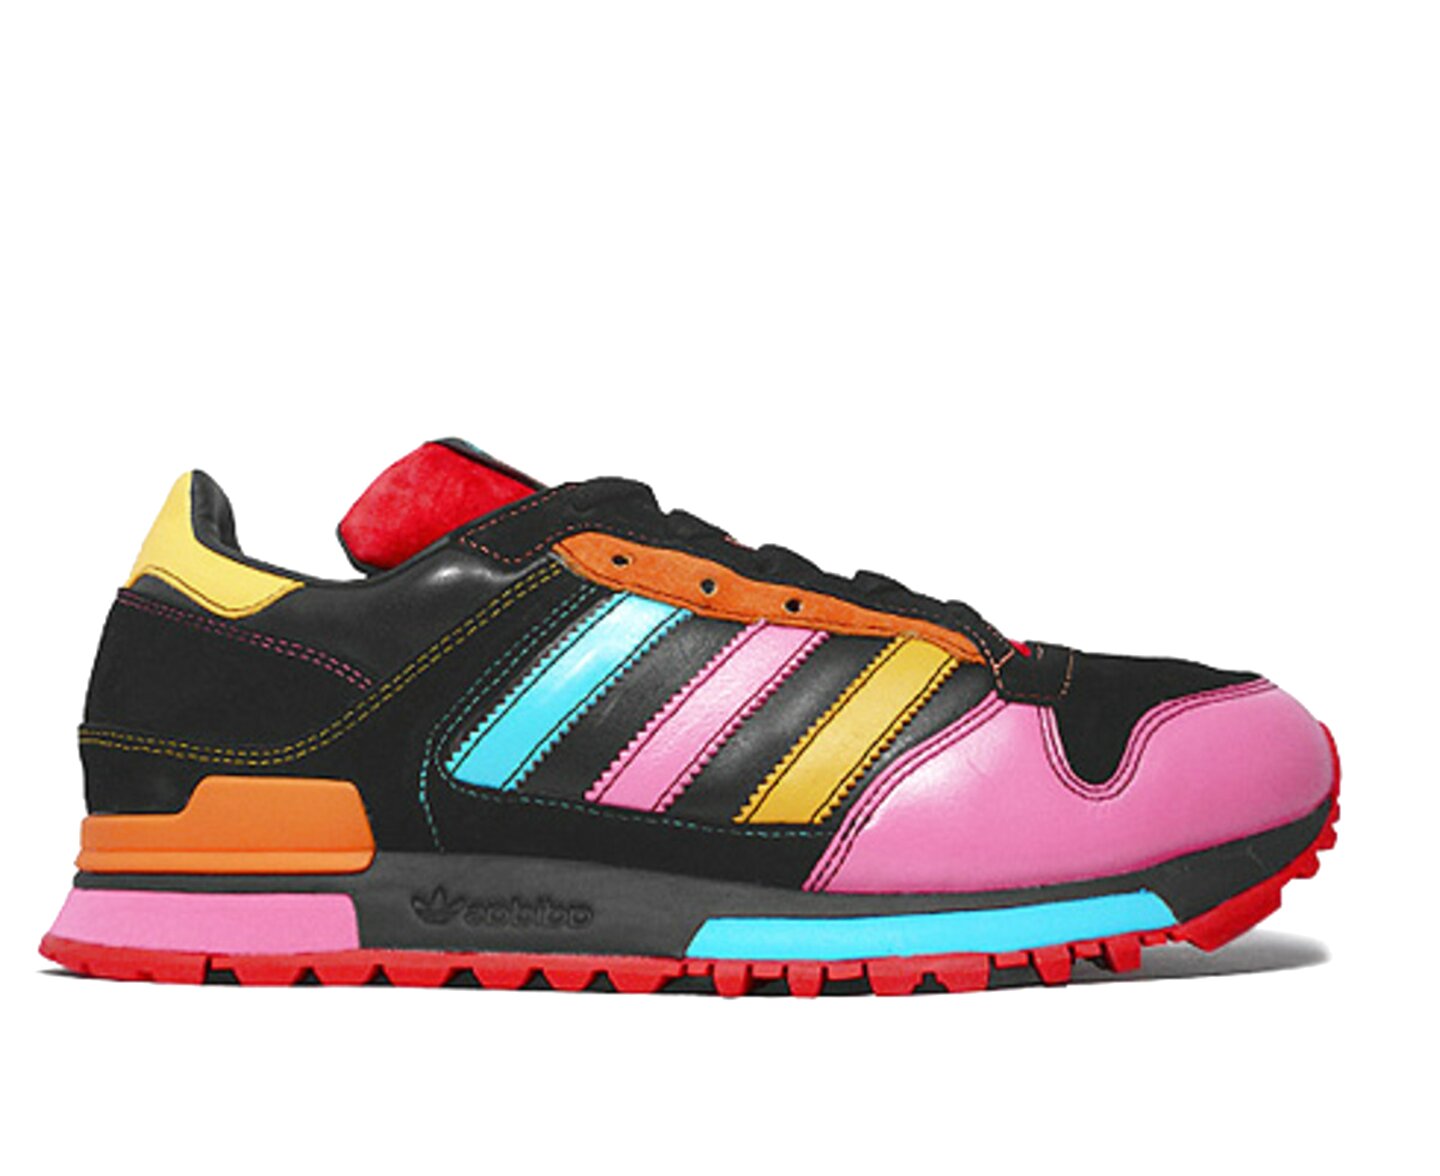 Adidas Zx 600 for sale in UK | 30 used Adidas Zx 600